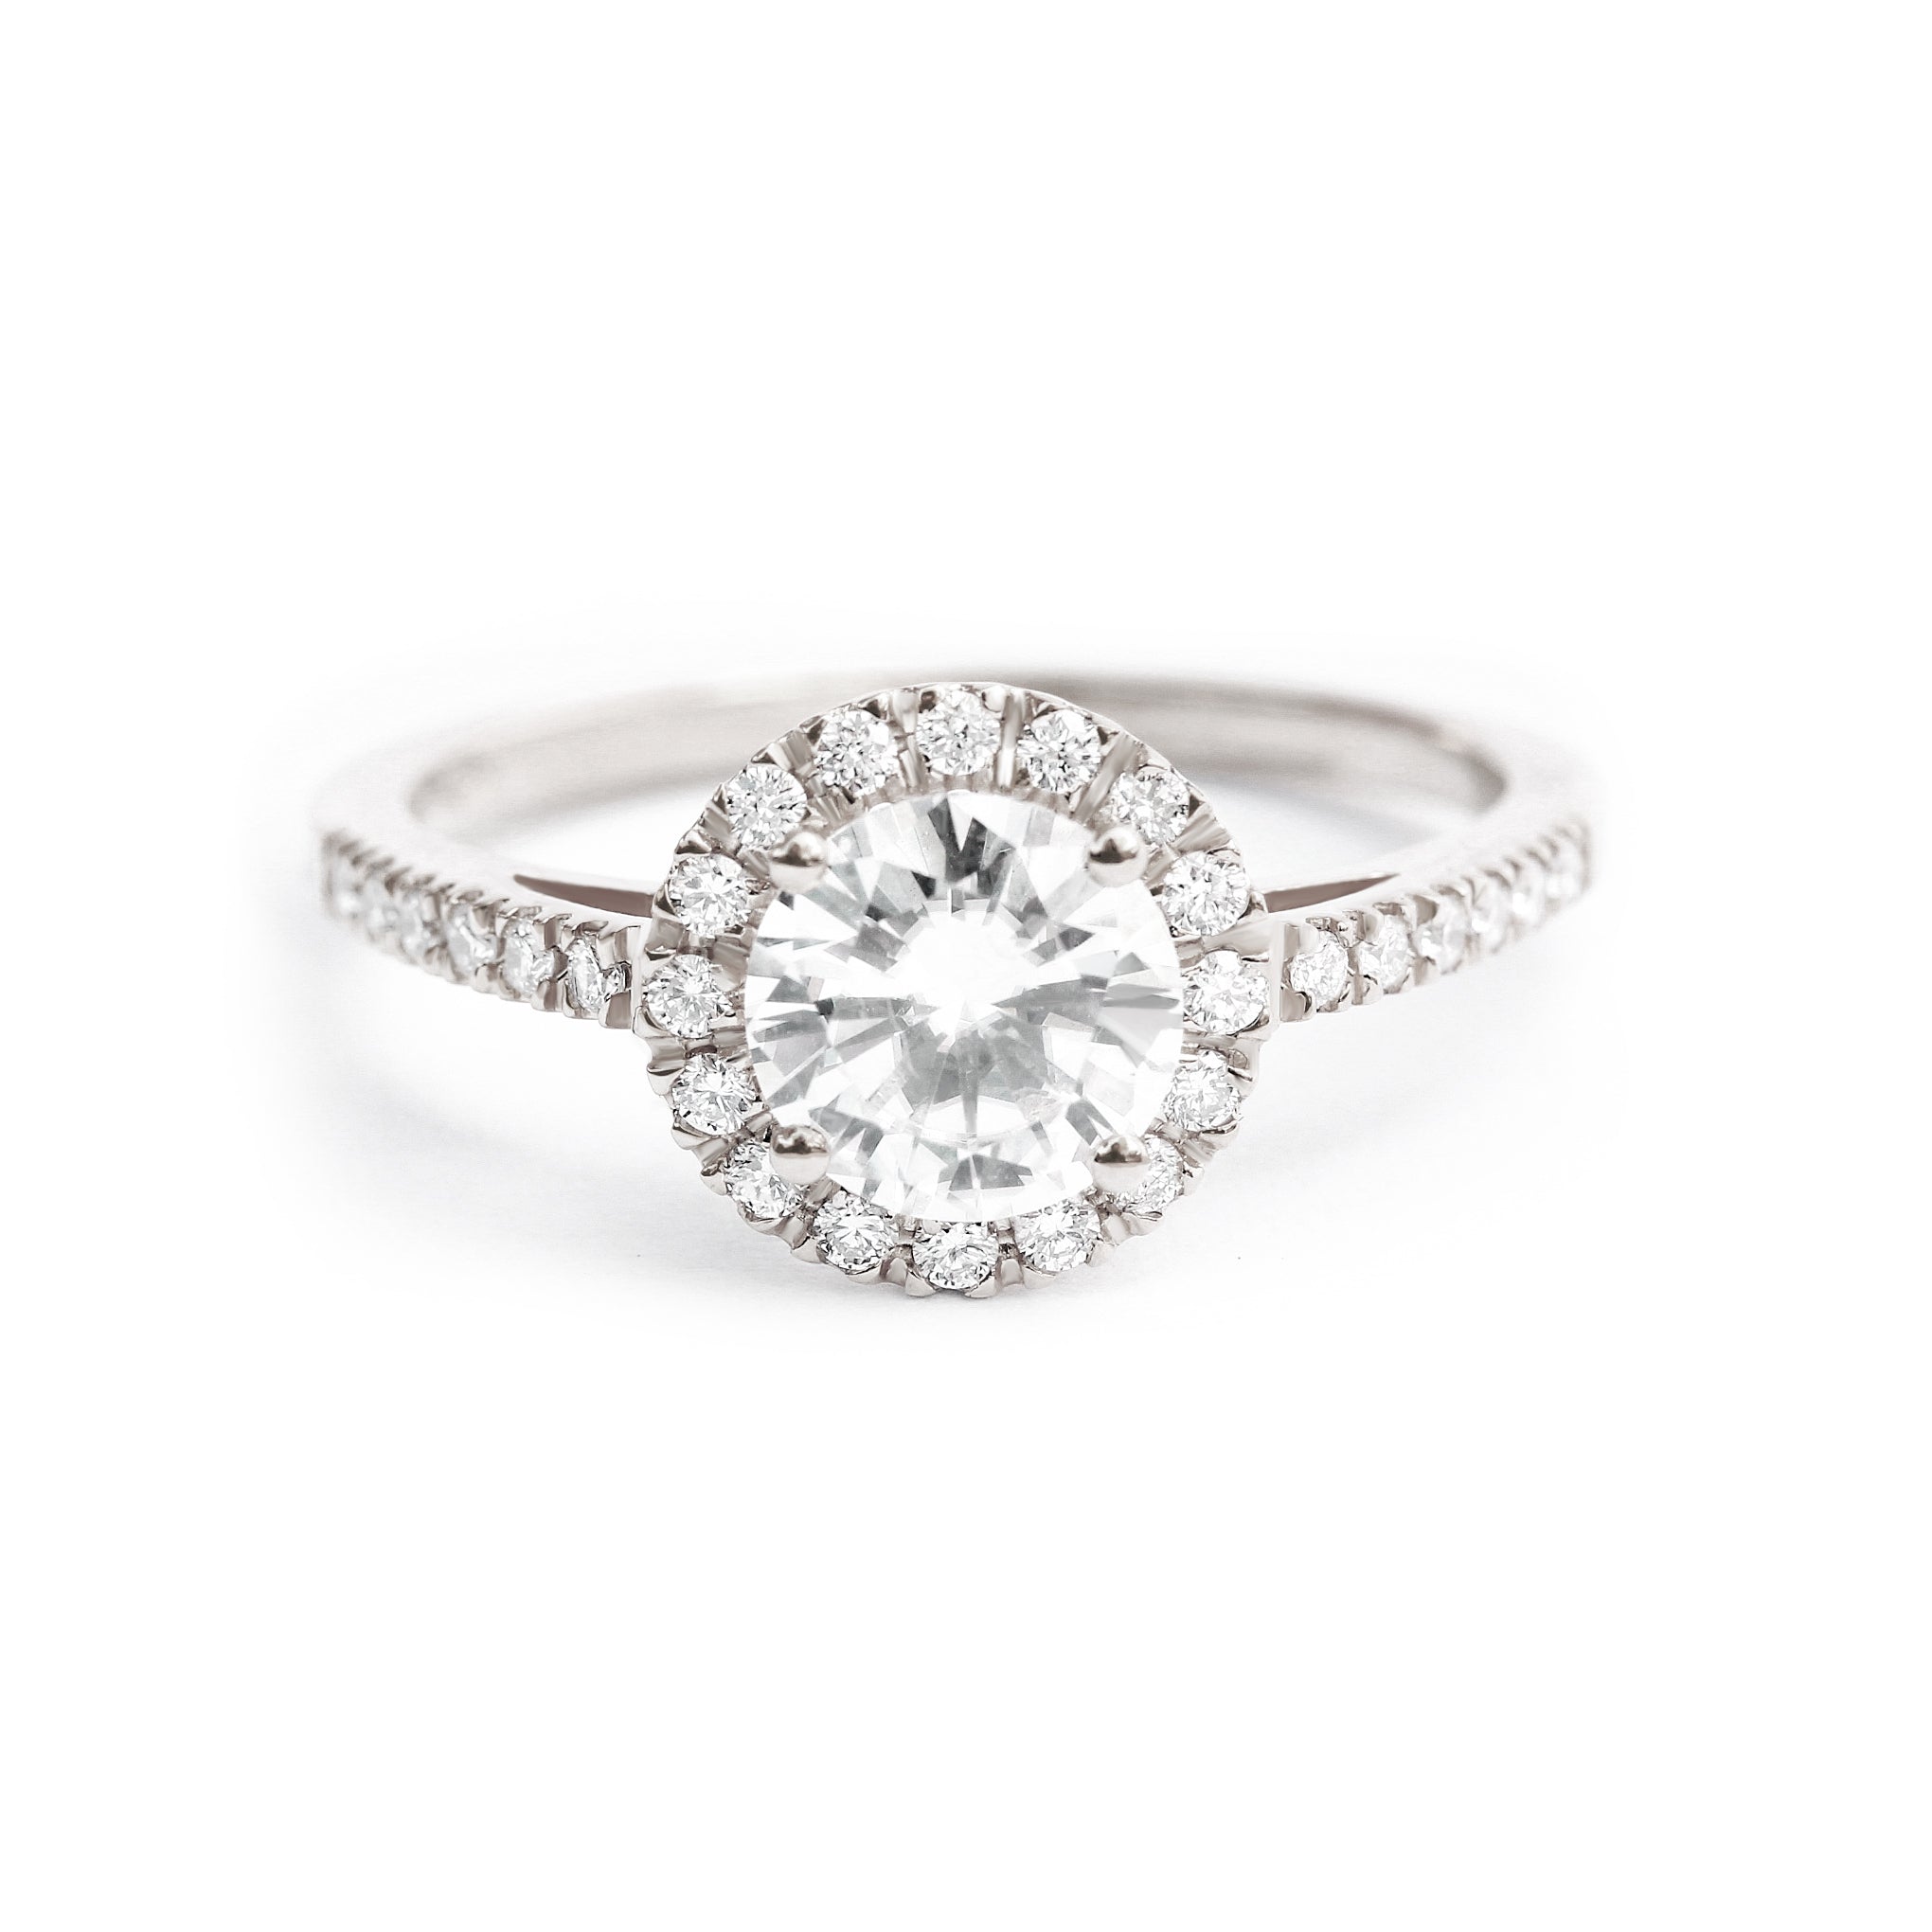 Classic & delicate Round diamond halo engagement ring - "Lady" ♥